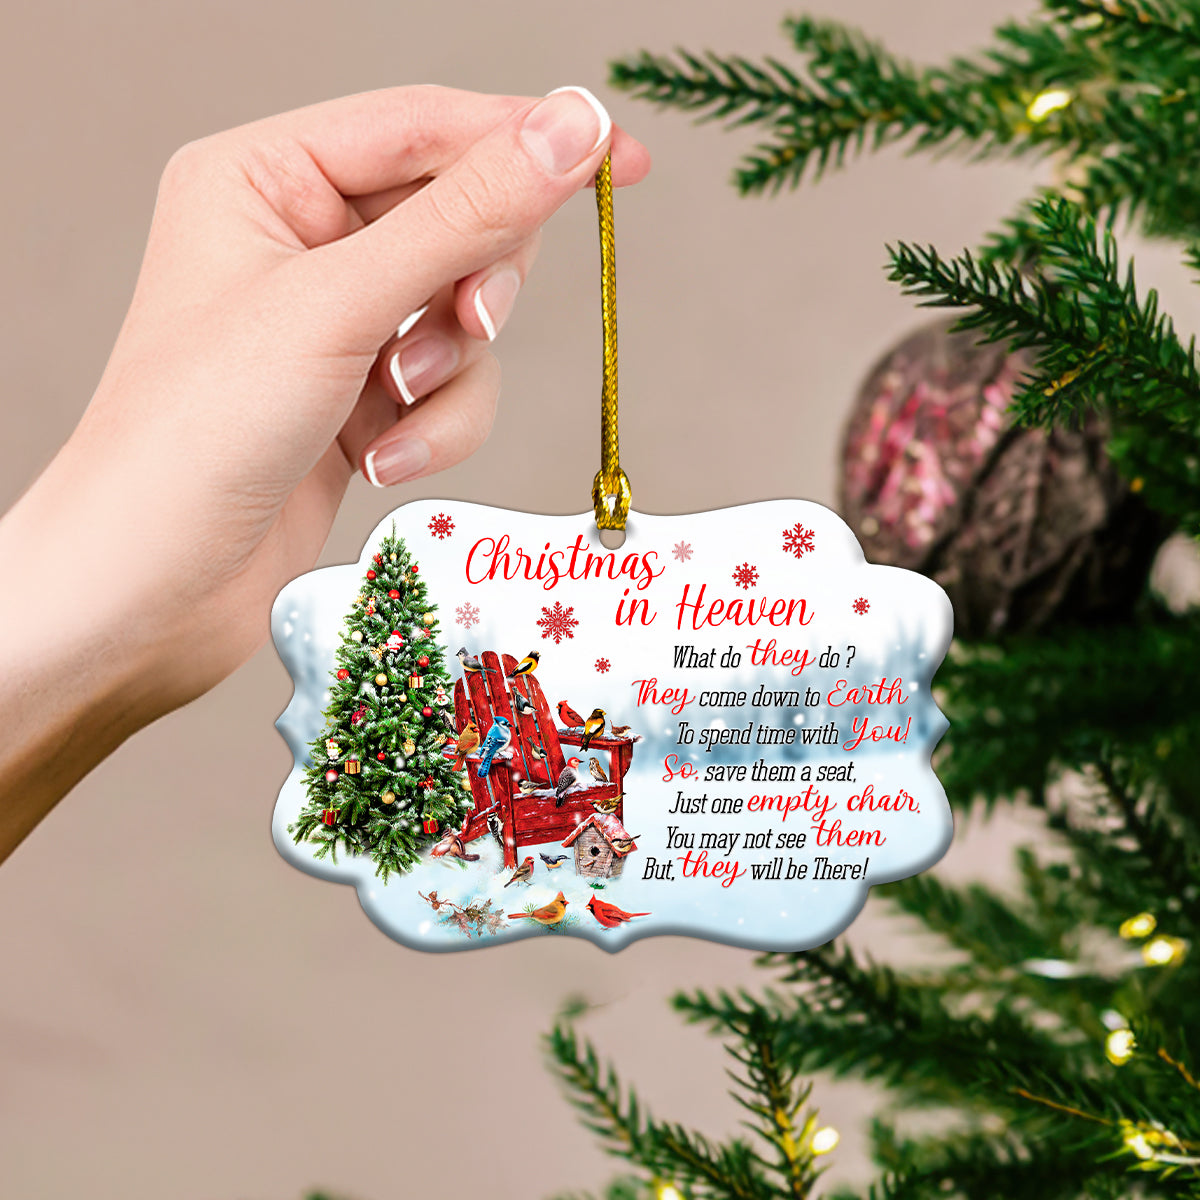 Christmas In Heaven, Christmas Decor, What Do That Do They Come Down To Earth To Spend It With You - Custom Shaped Ornament